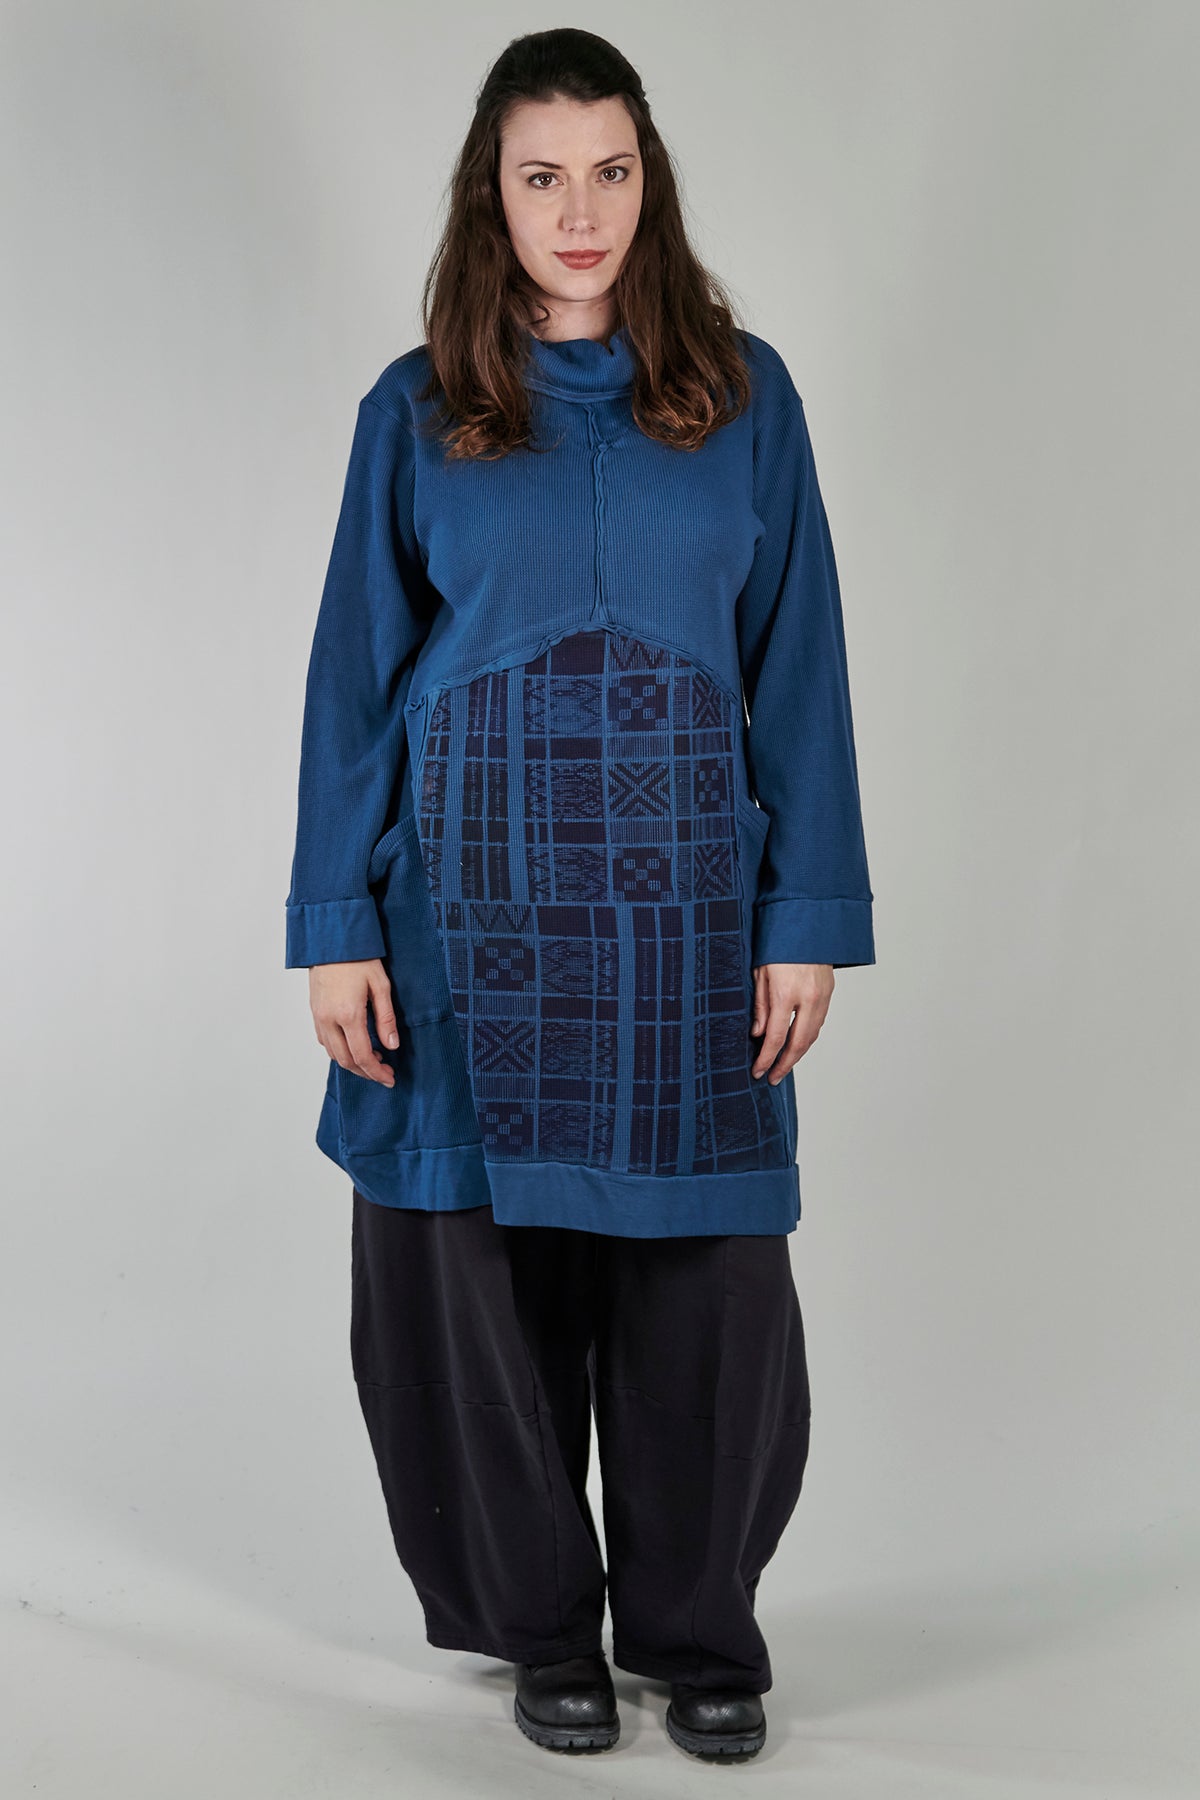 2207 Thermal Travel All Roads Tunic Imaginary Blue-P